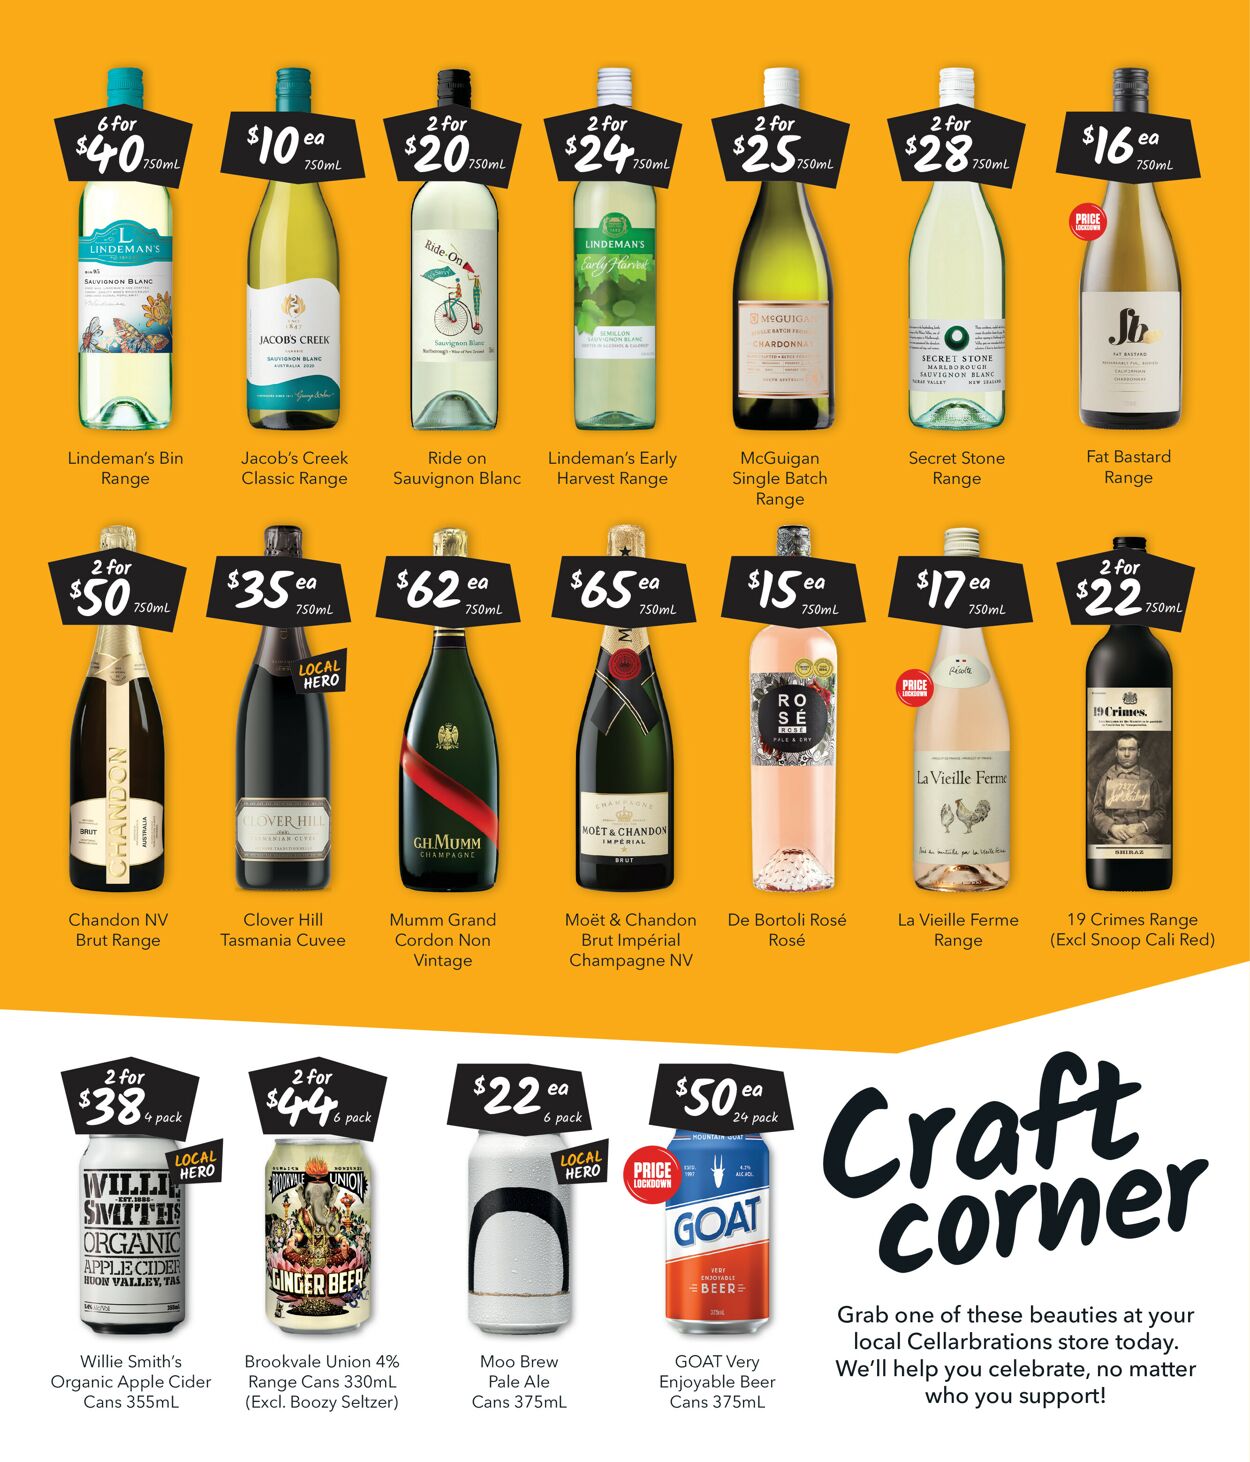 Cellarbrations Catalogue from 12/09/2022